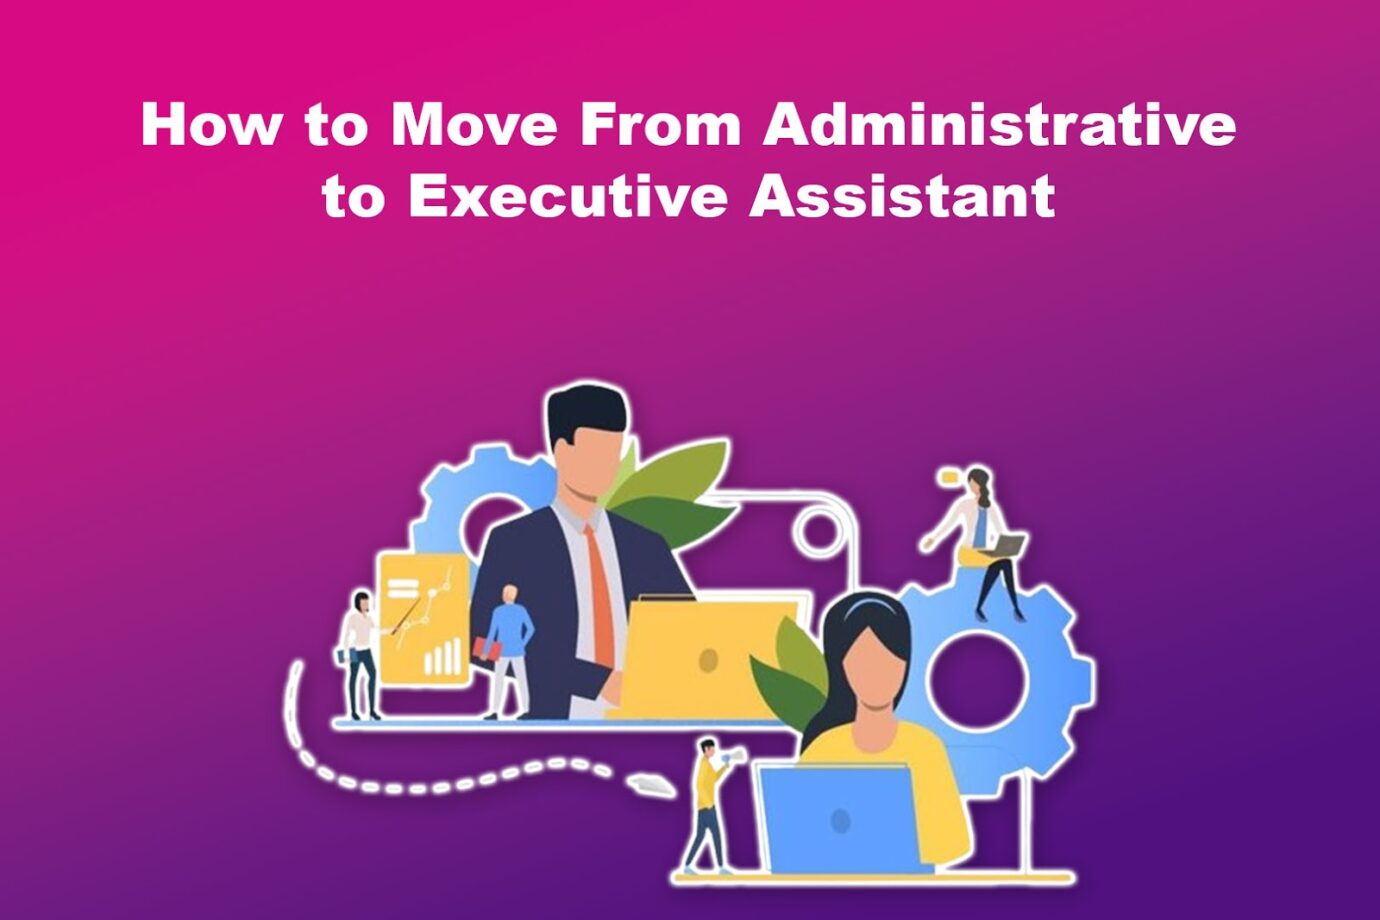 How to Move From Administrative to Executive Assistant